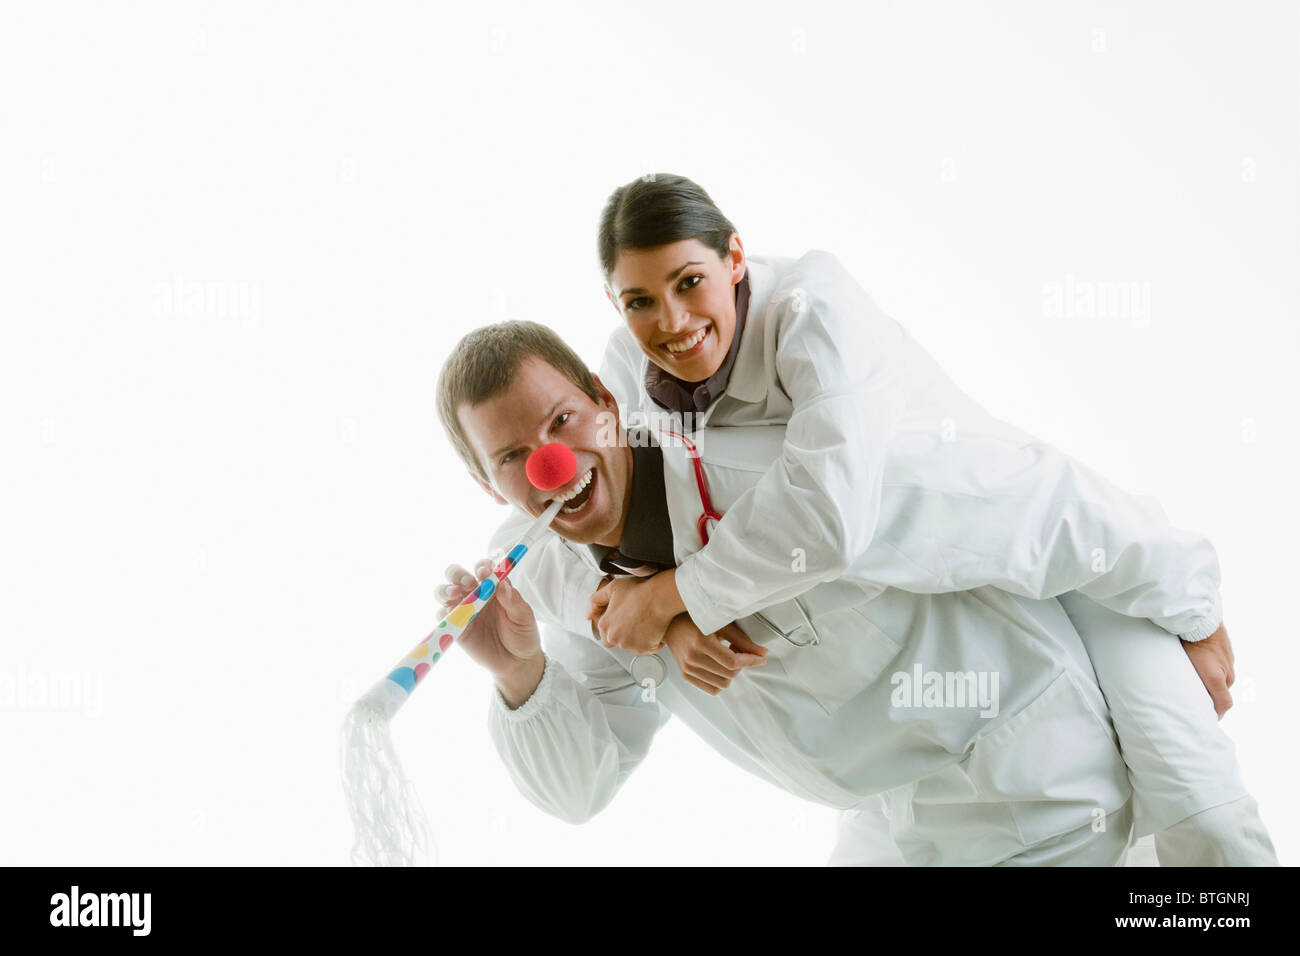 Male and female doctors playing with party toys Stock Photo